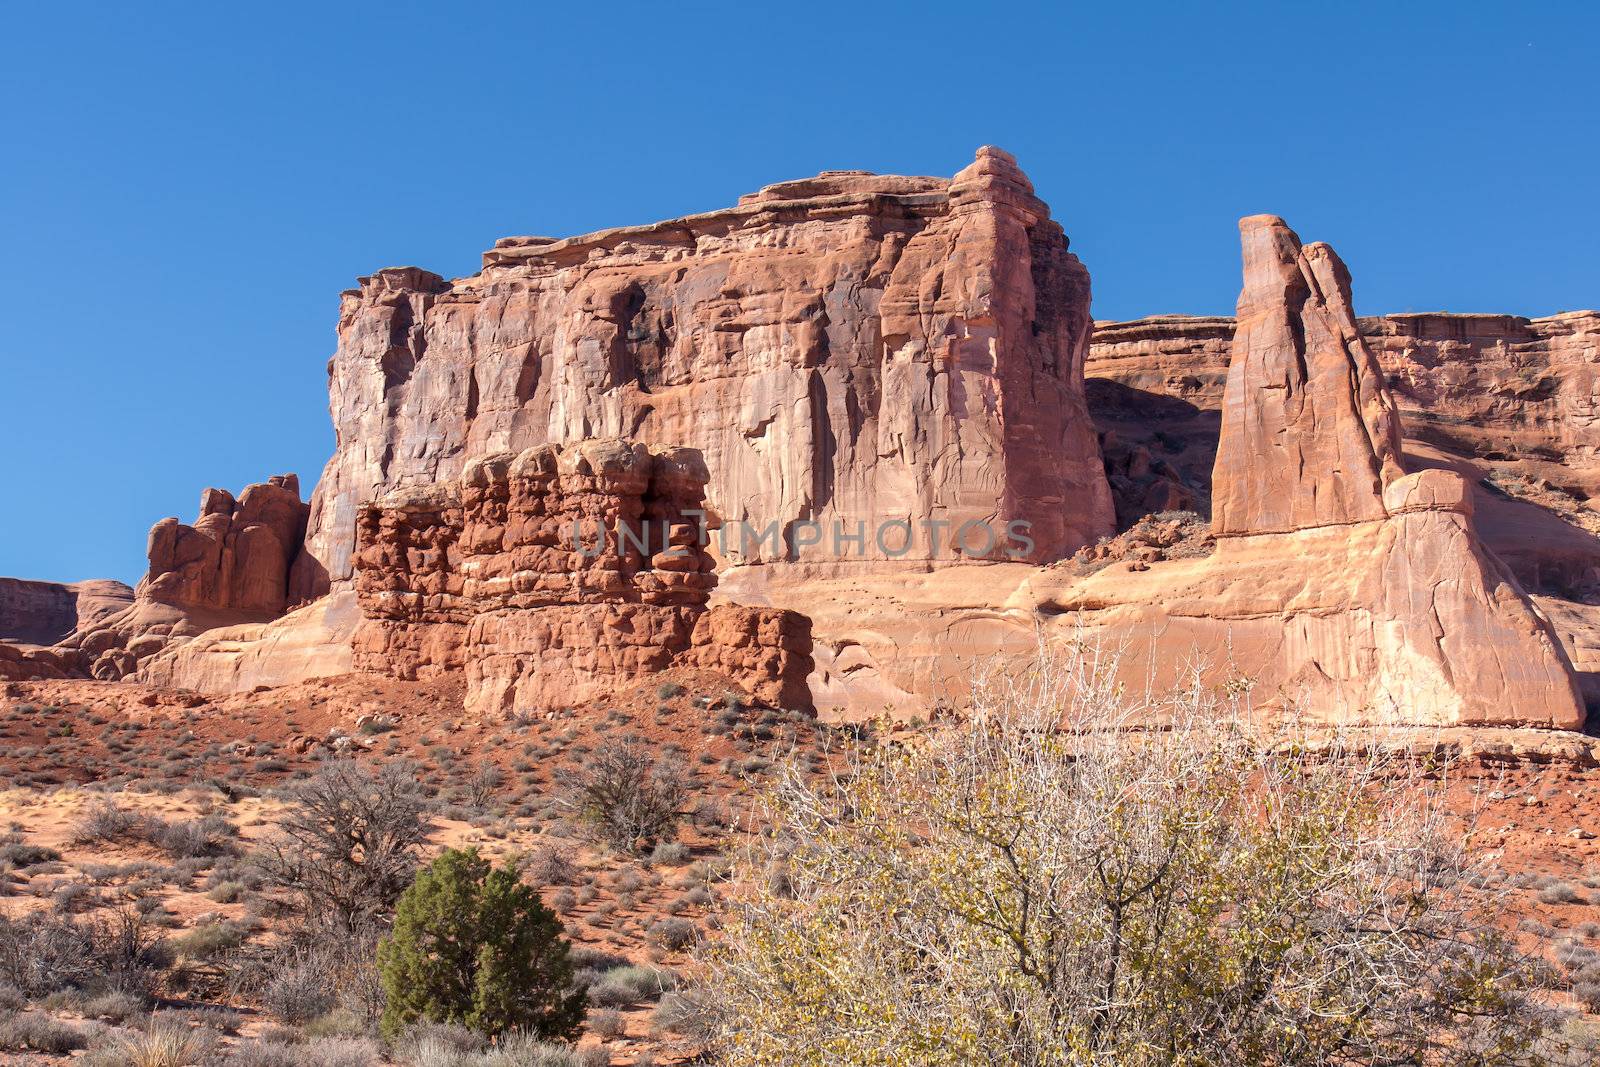 With this huge formation at Arches National Park the outer layer can be seen slowly eroding away from the solid rock underneath.